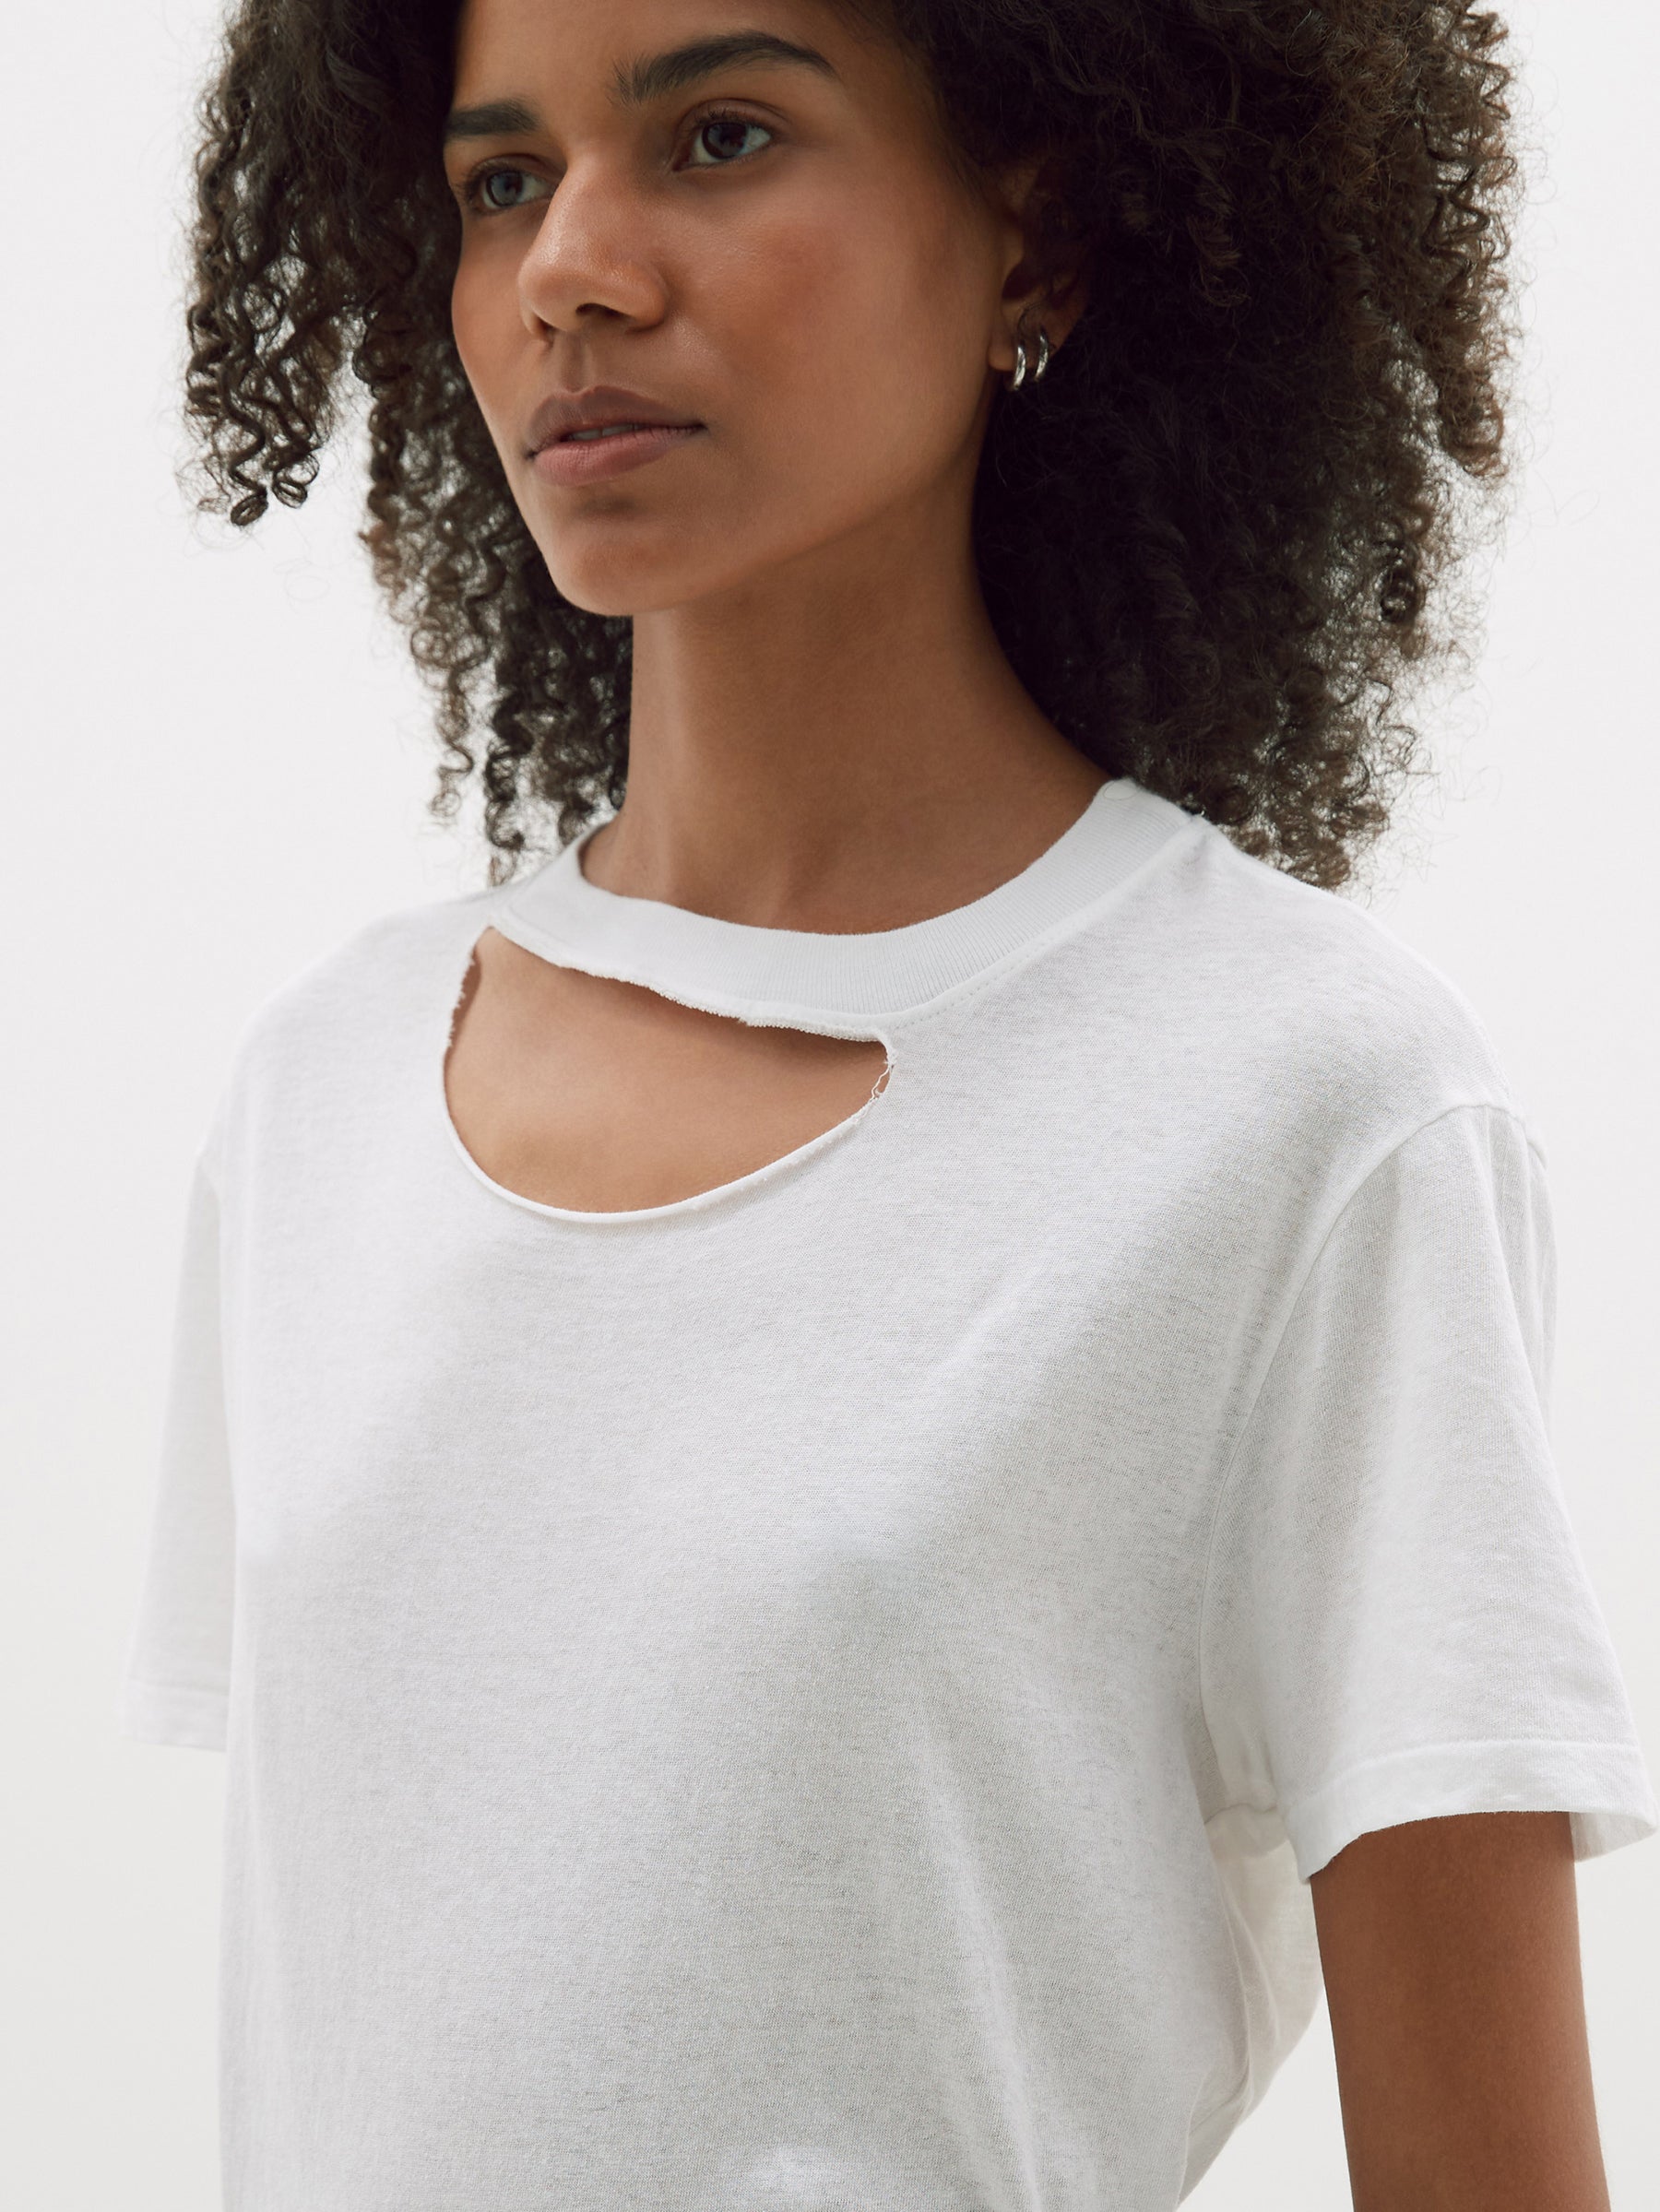 Cut-out t-shirt, 2019 Collection